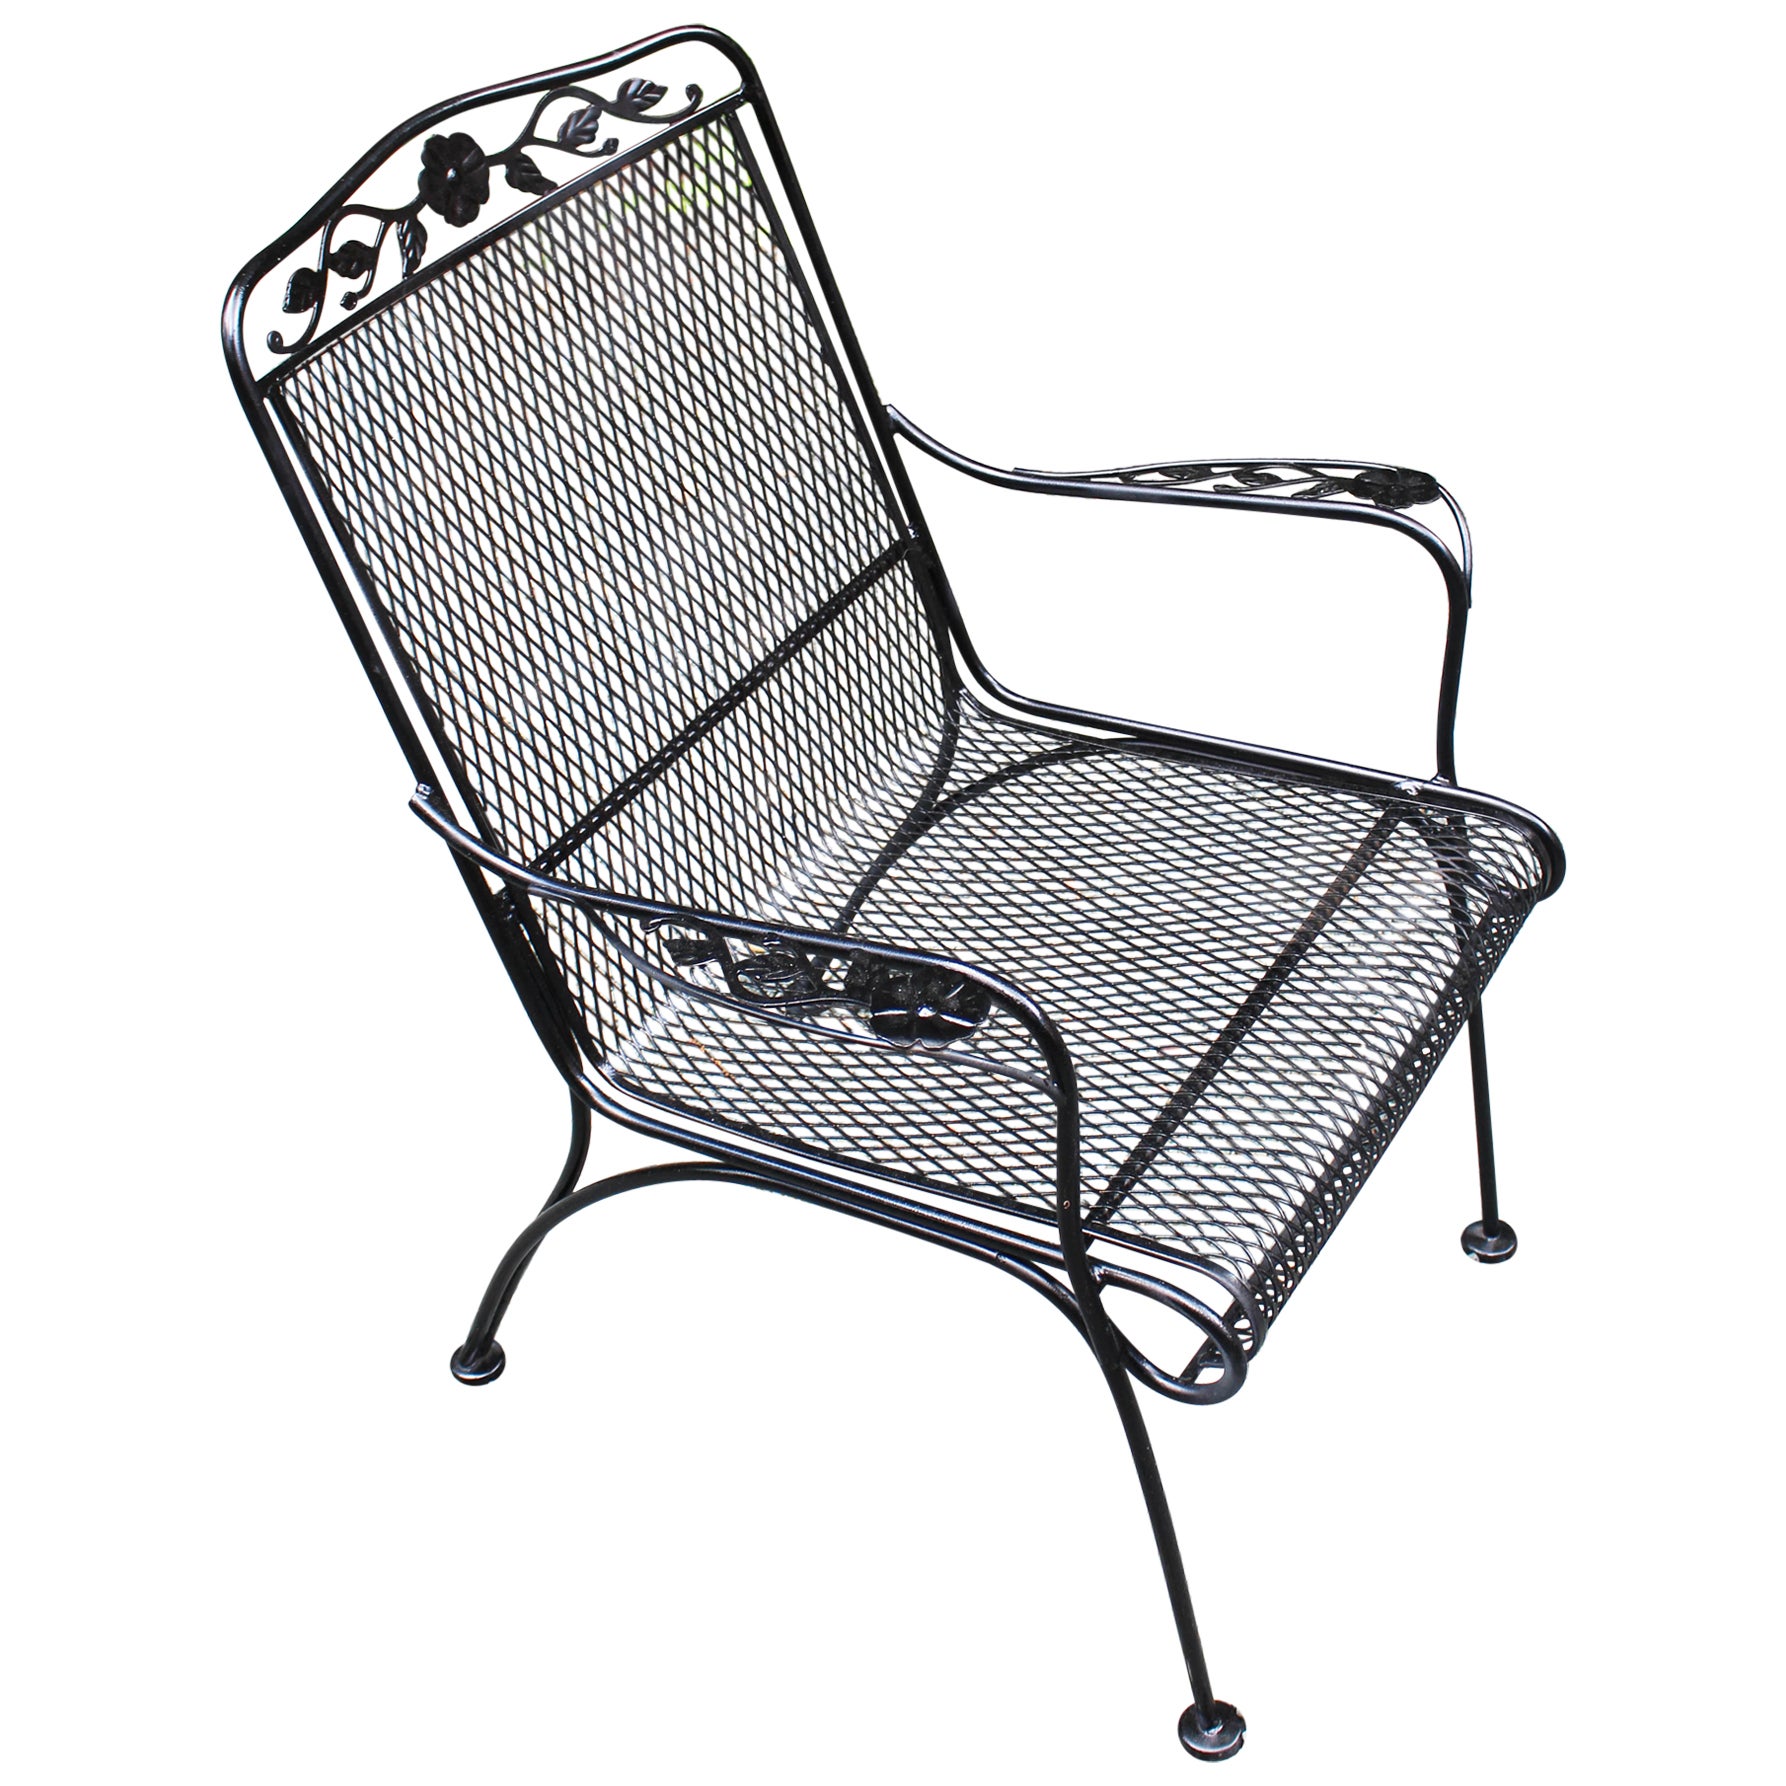 Mid-20th Century Wrought Iron Arm Chair Attributed to Russell Woodard For Sale